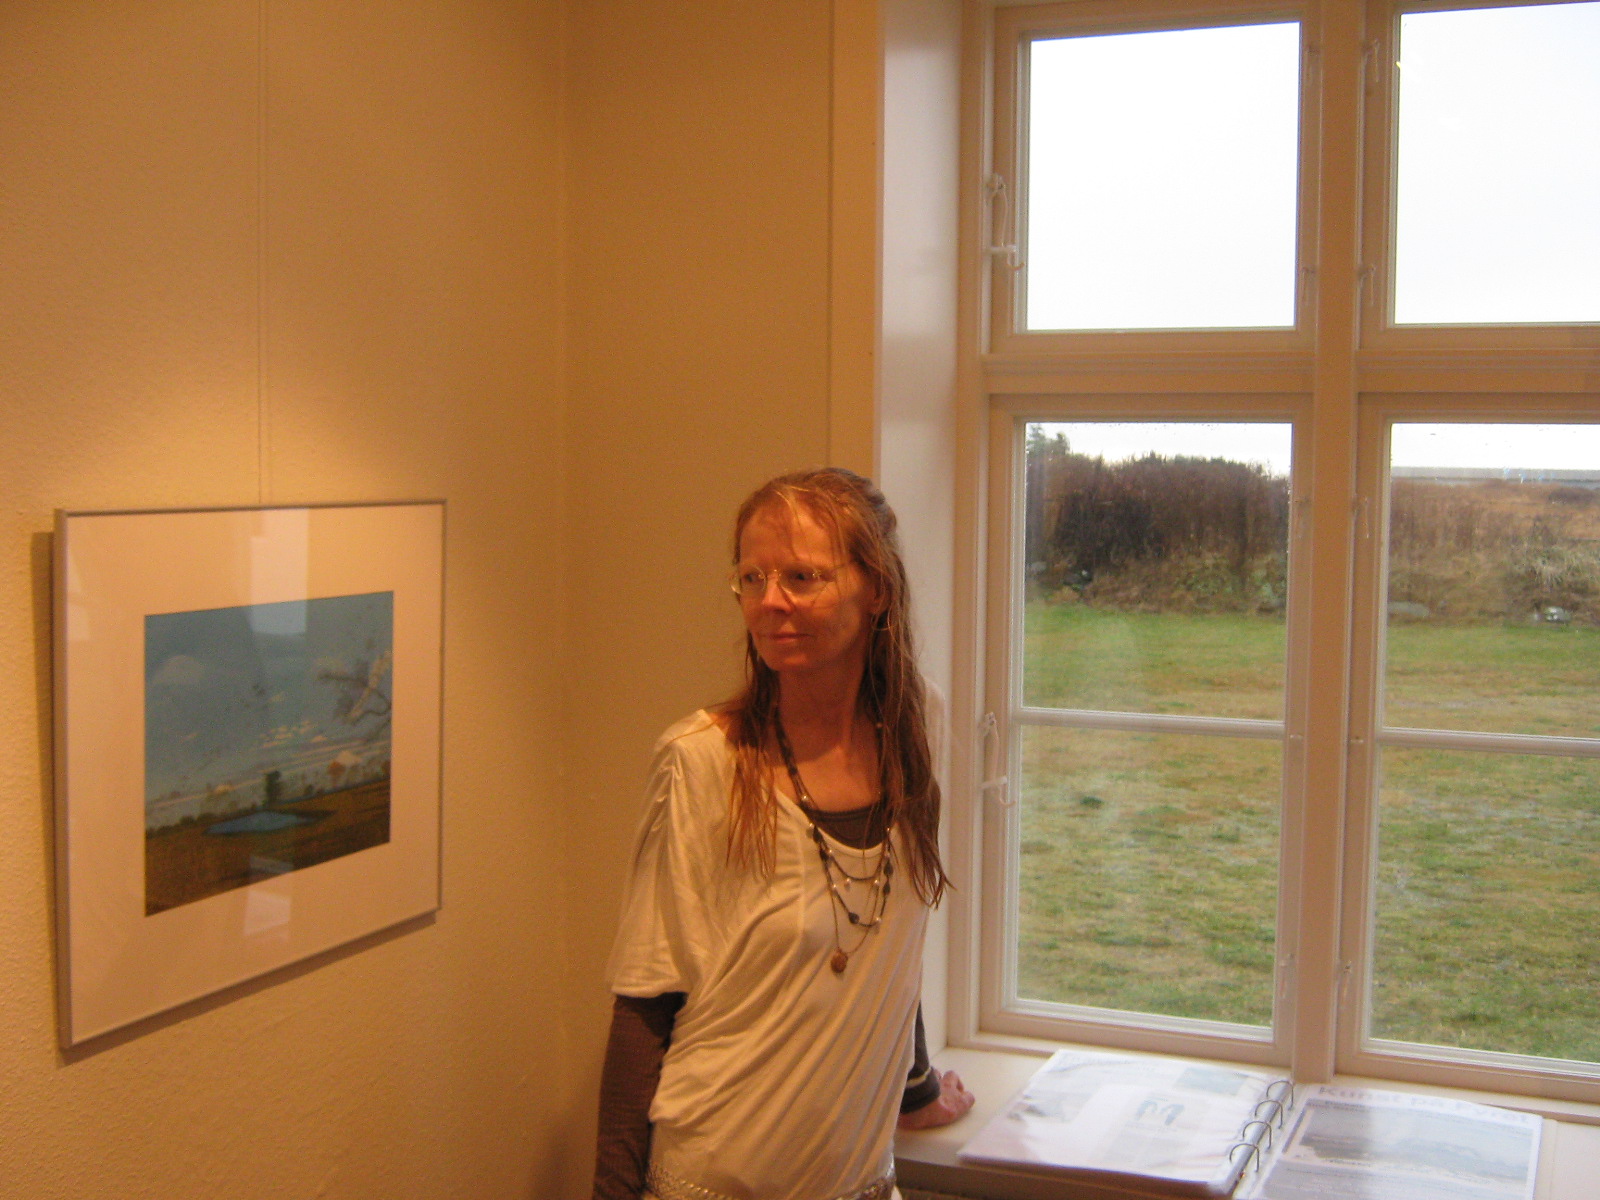 Elsebeth in the lodge of the  Hirtshals lighthouse keeper's assistant 2009